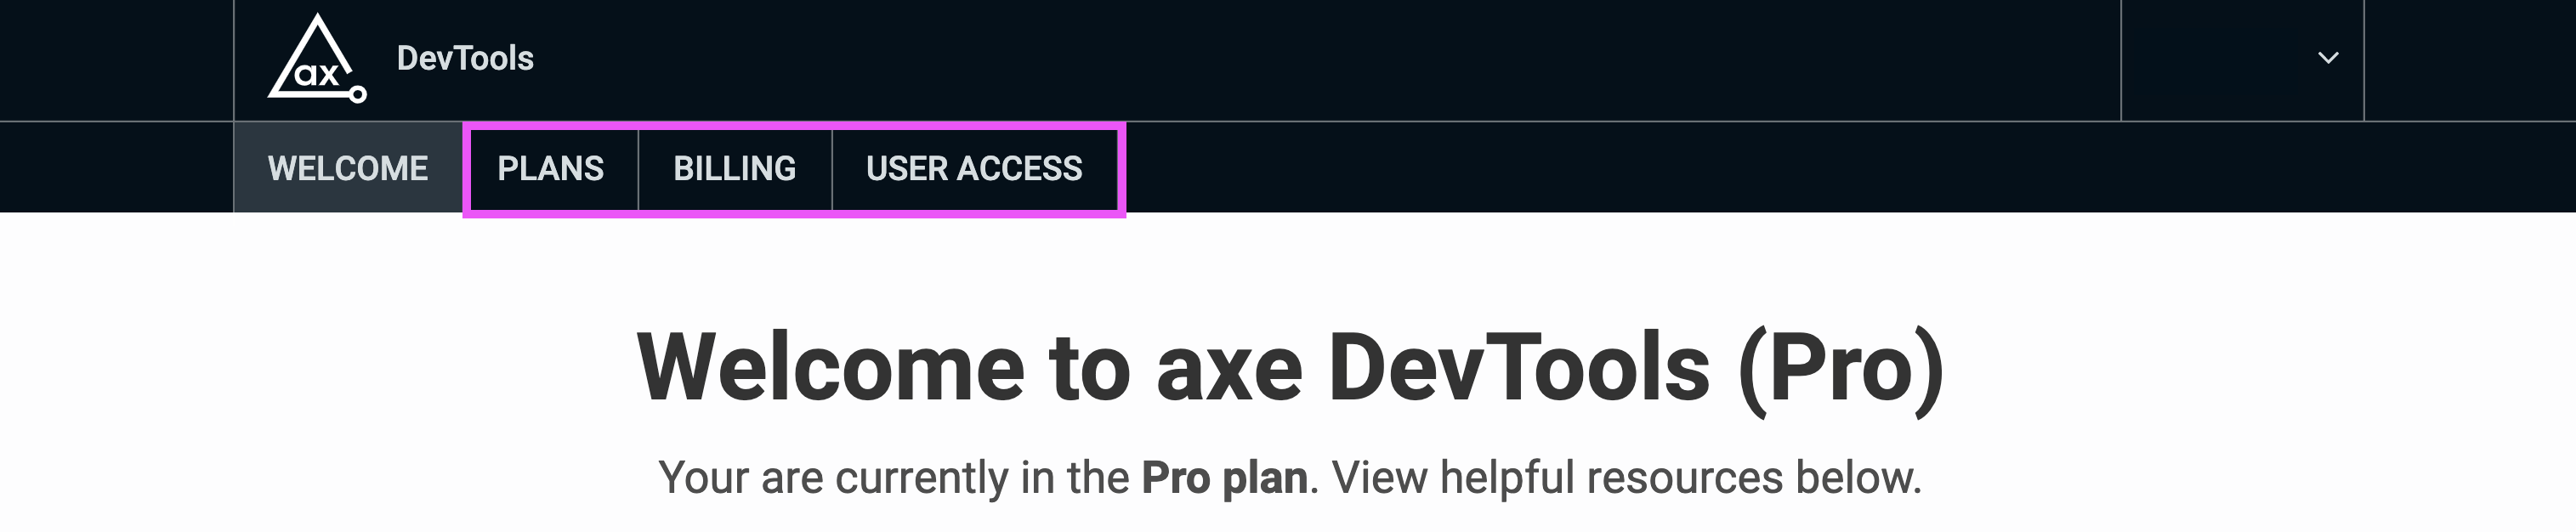 Screenshot of axe.deque.com and new tabs for managing your account for axe DevTools Pro: Plans, Billing, and User Access.